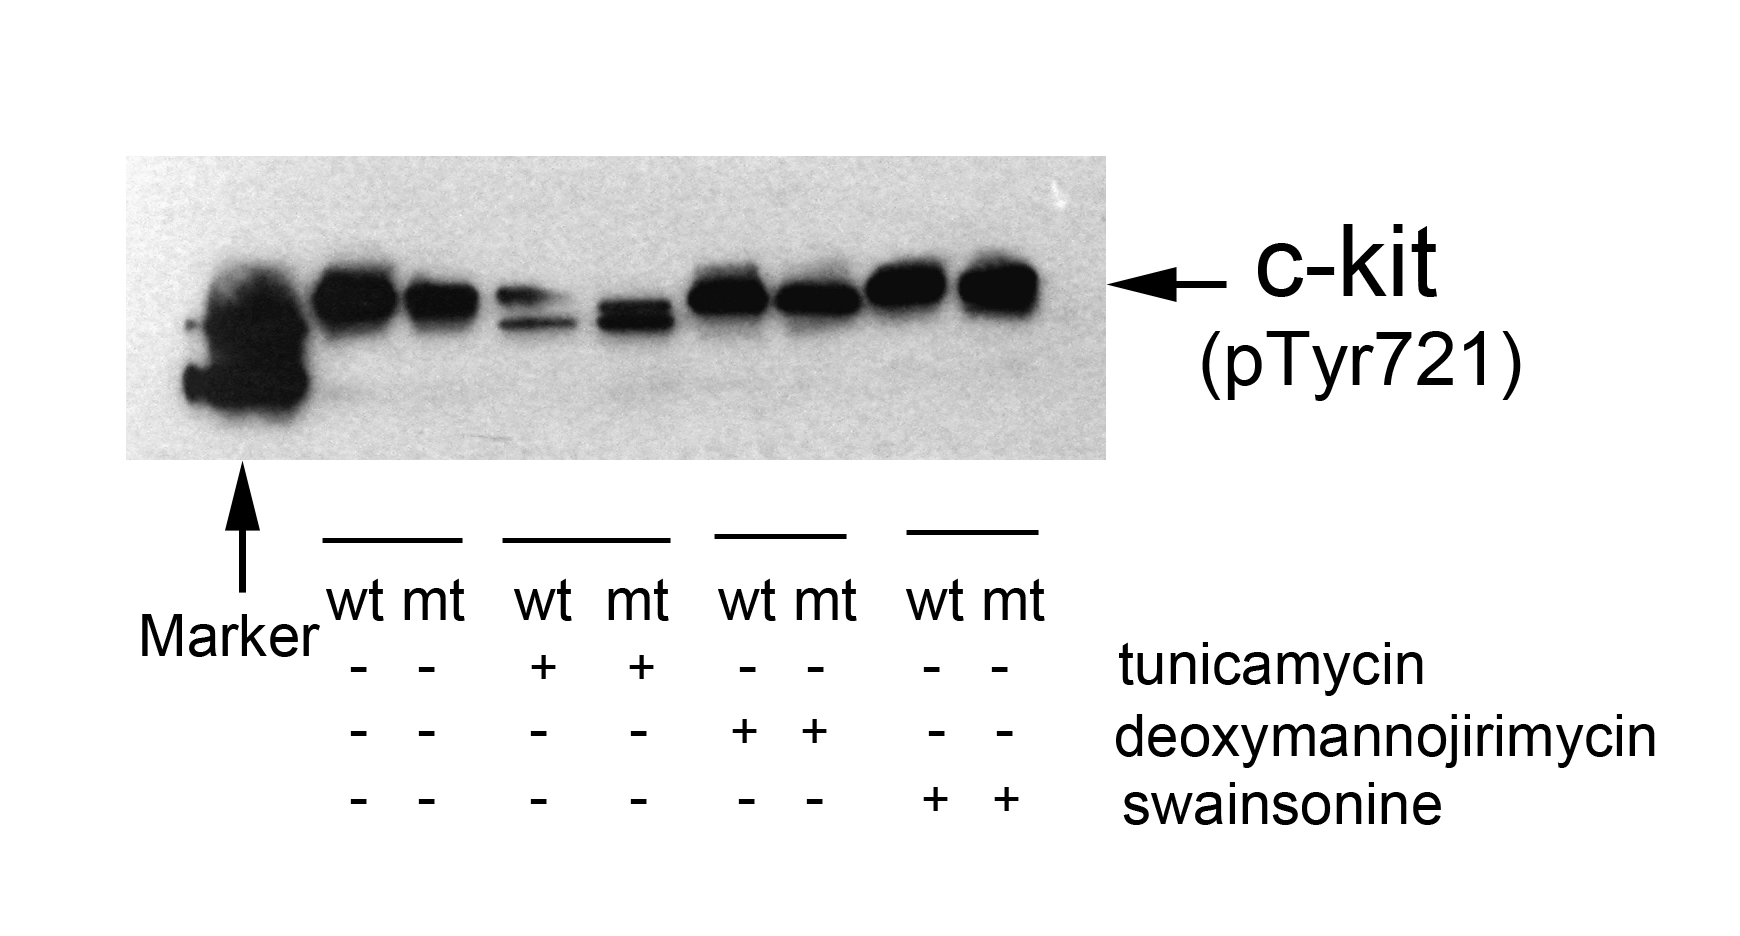 Extracts from 293T cells (transfected with wild or mutant type c-kit and treated with SCF (100ng/ml,15min),were analyzed by western blot using c-Kit (Phospho-Tyr721) antibody.